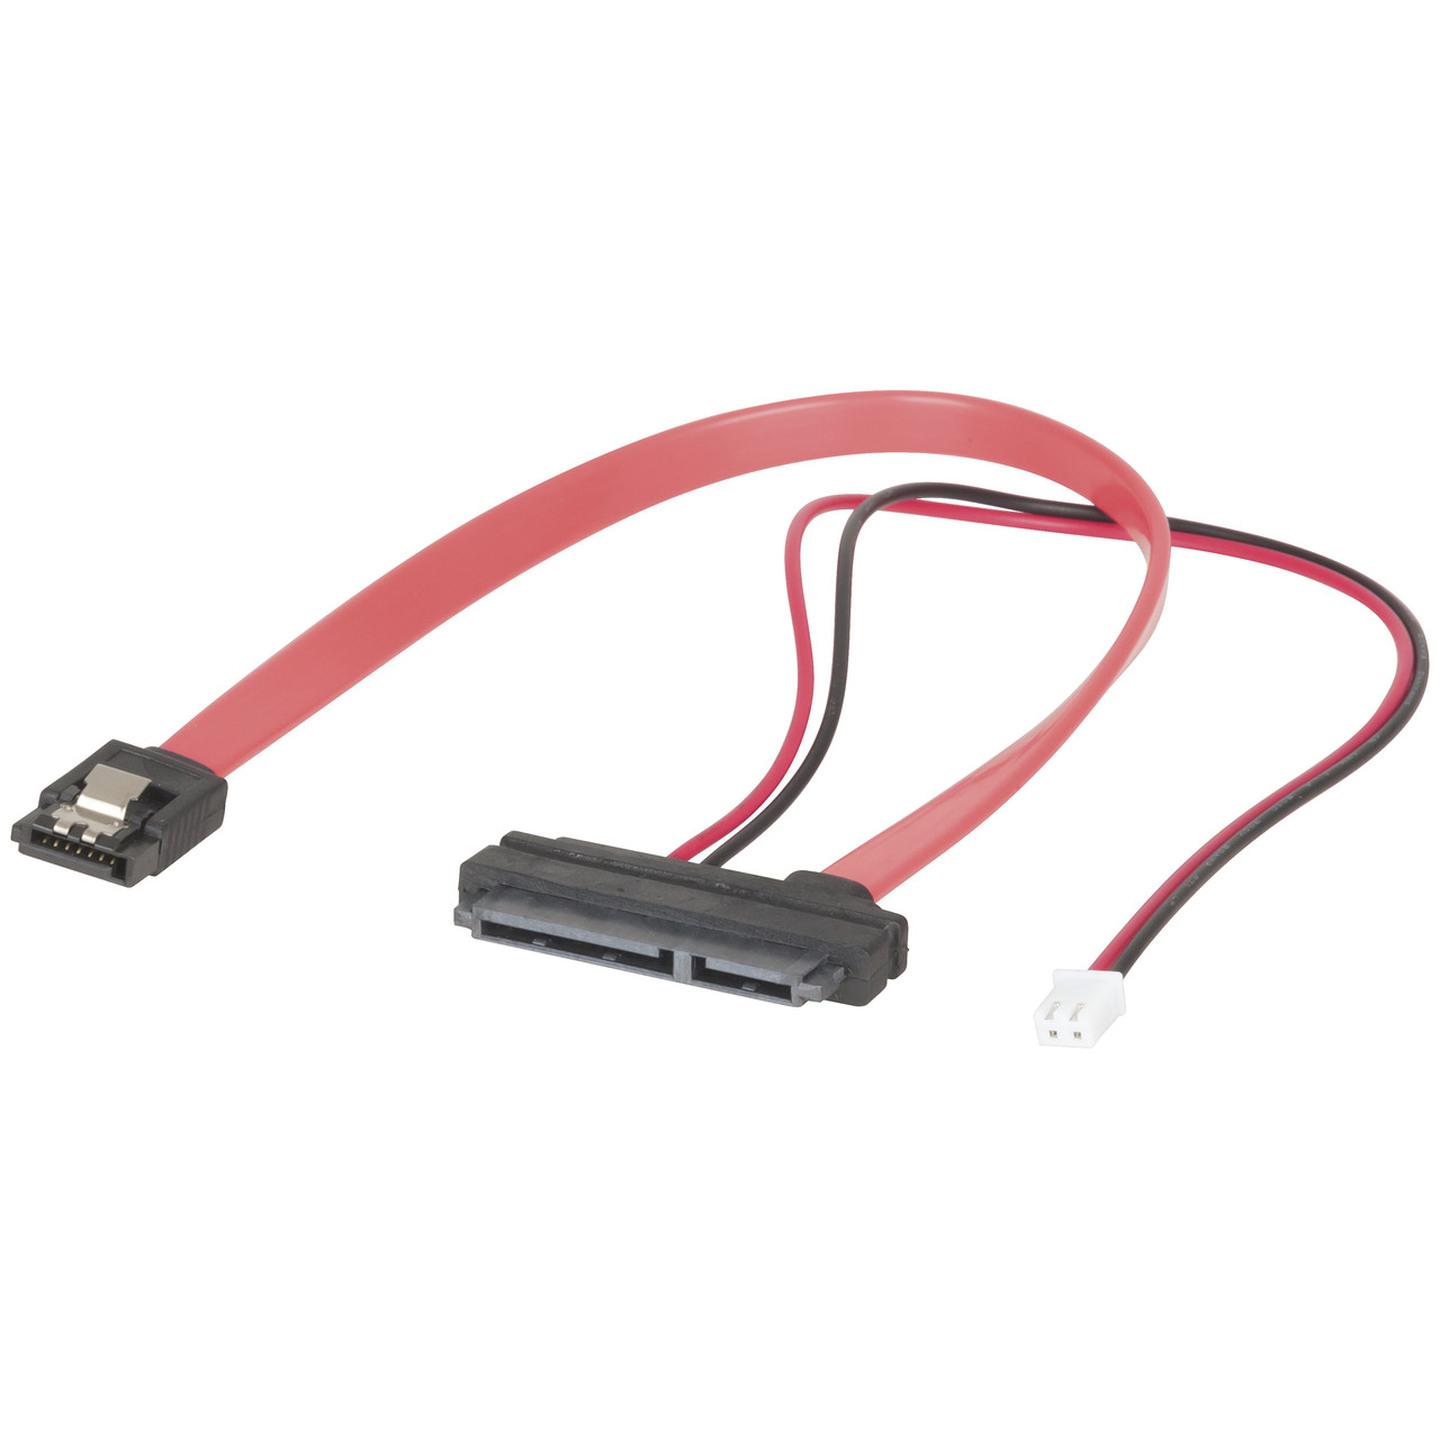 SATA Data and Power Cable for pcDuino